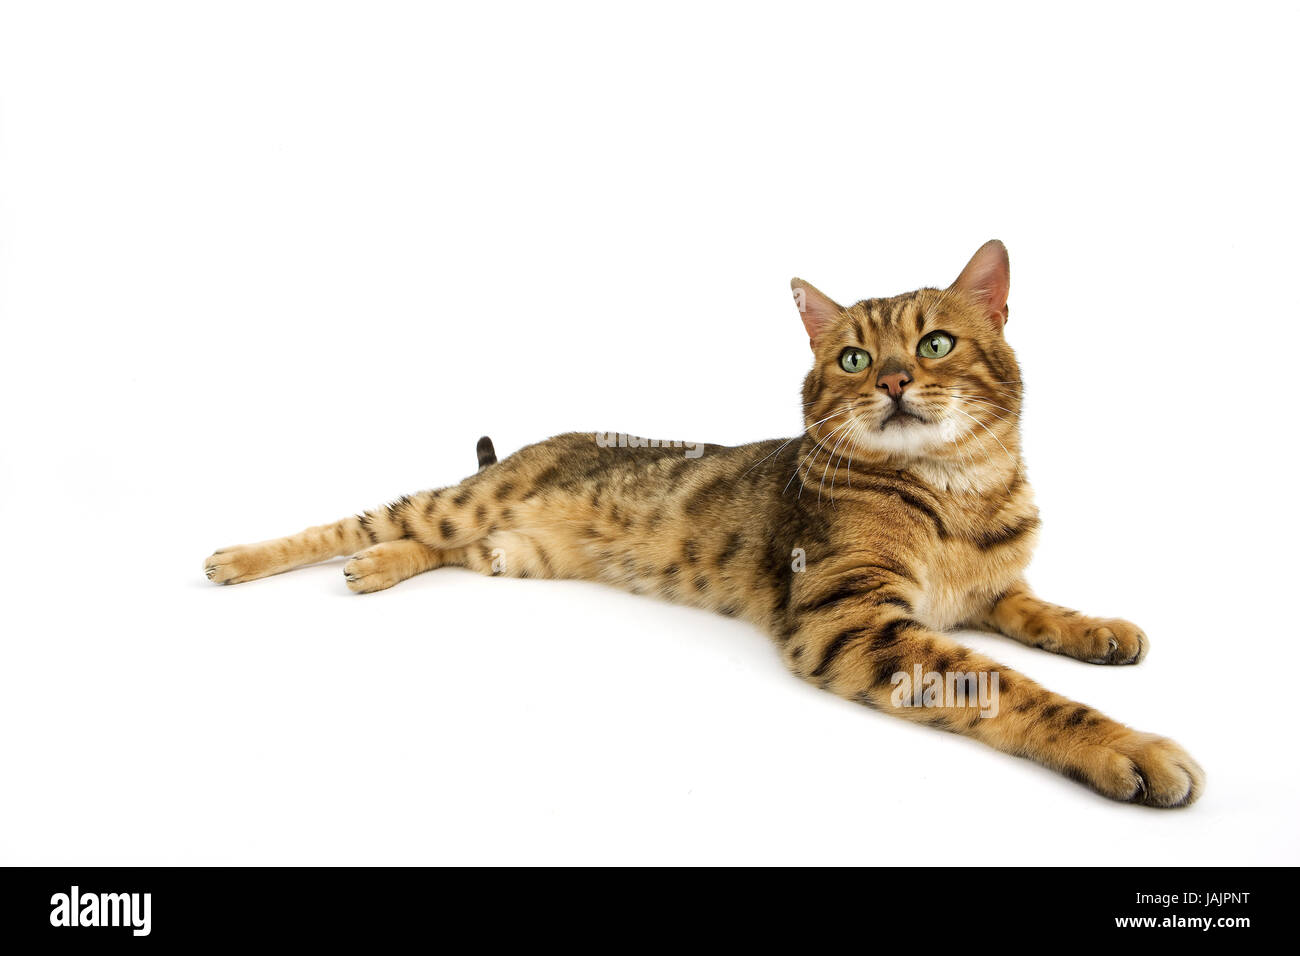 Bengale,Brown spotted tabby,fond blanc, Banque D'Images